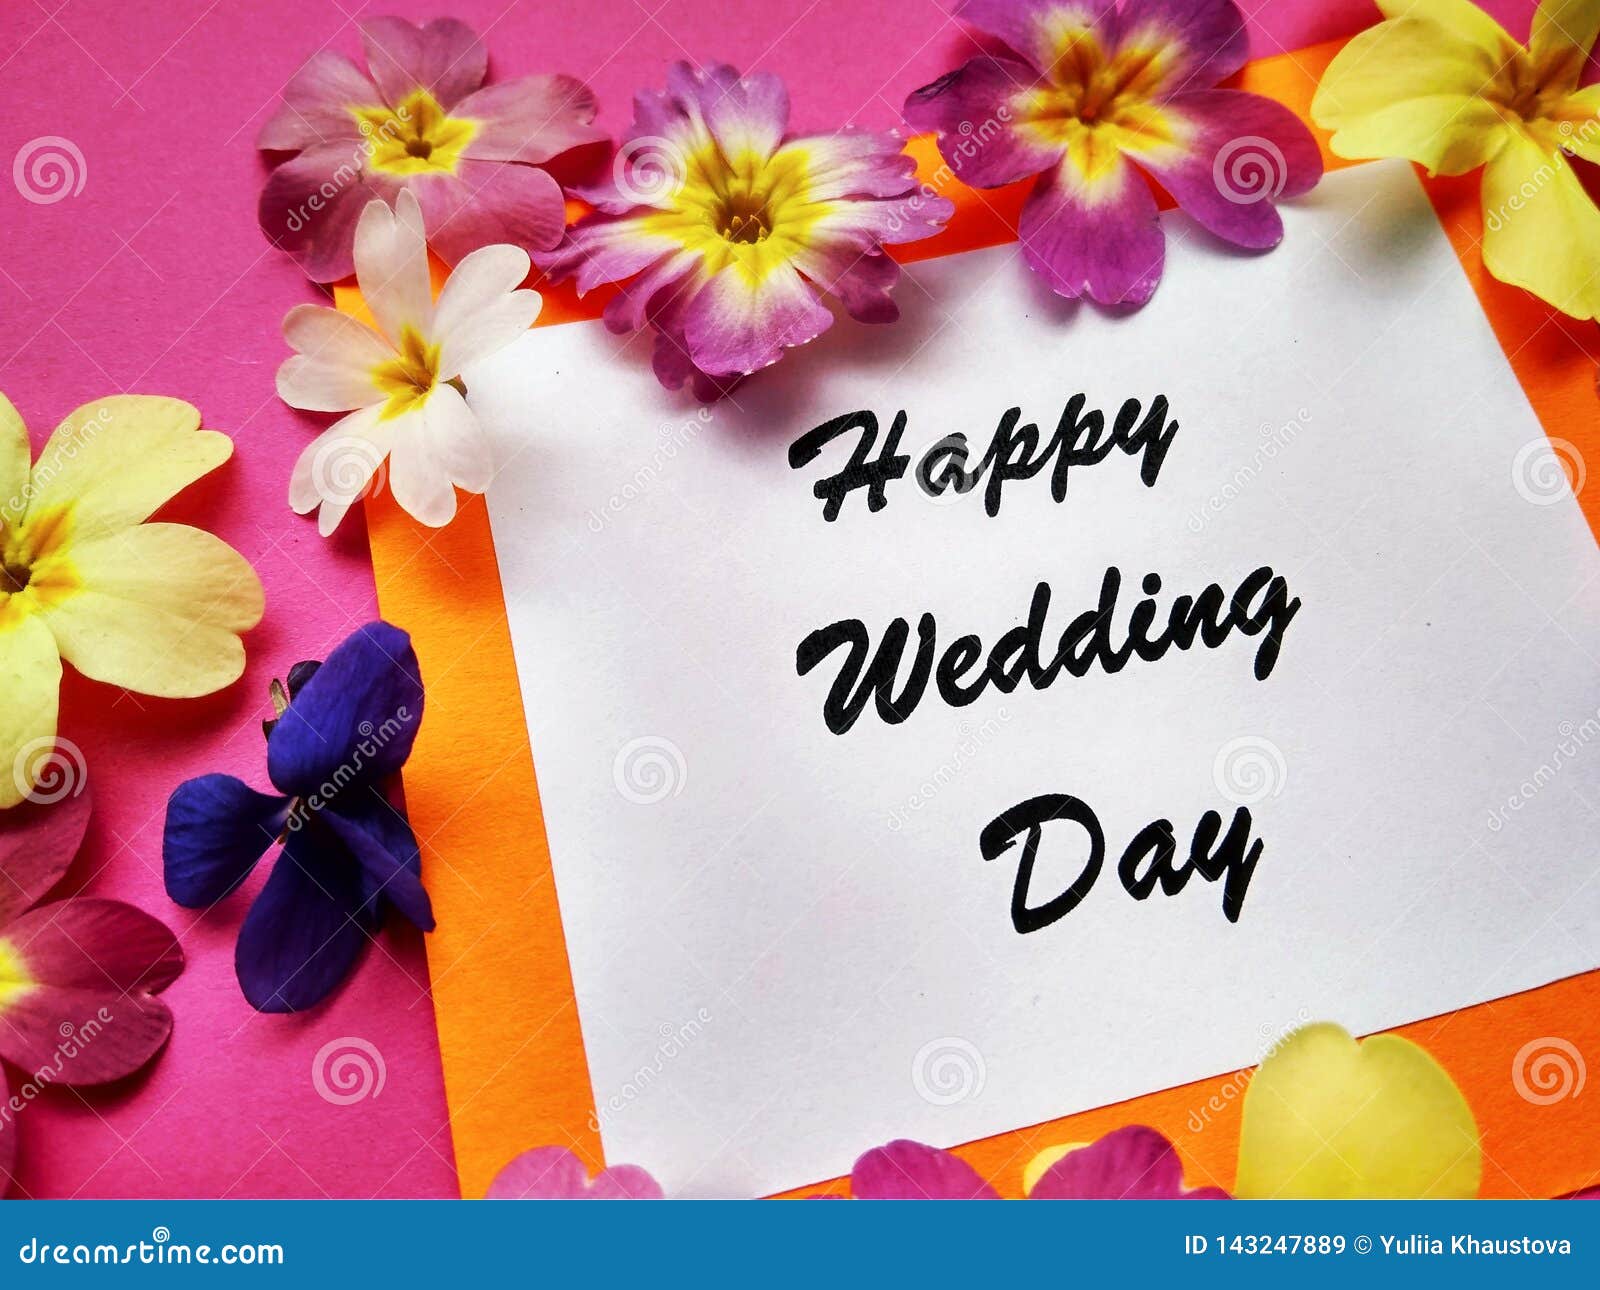 The Inscription Happy Wedding Day with Flowers on a Colored Background  Stock Image - Image of flower, decor: 143247889